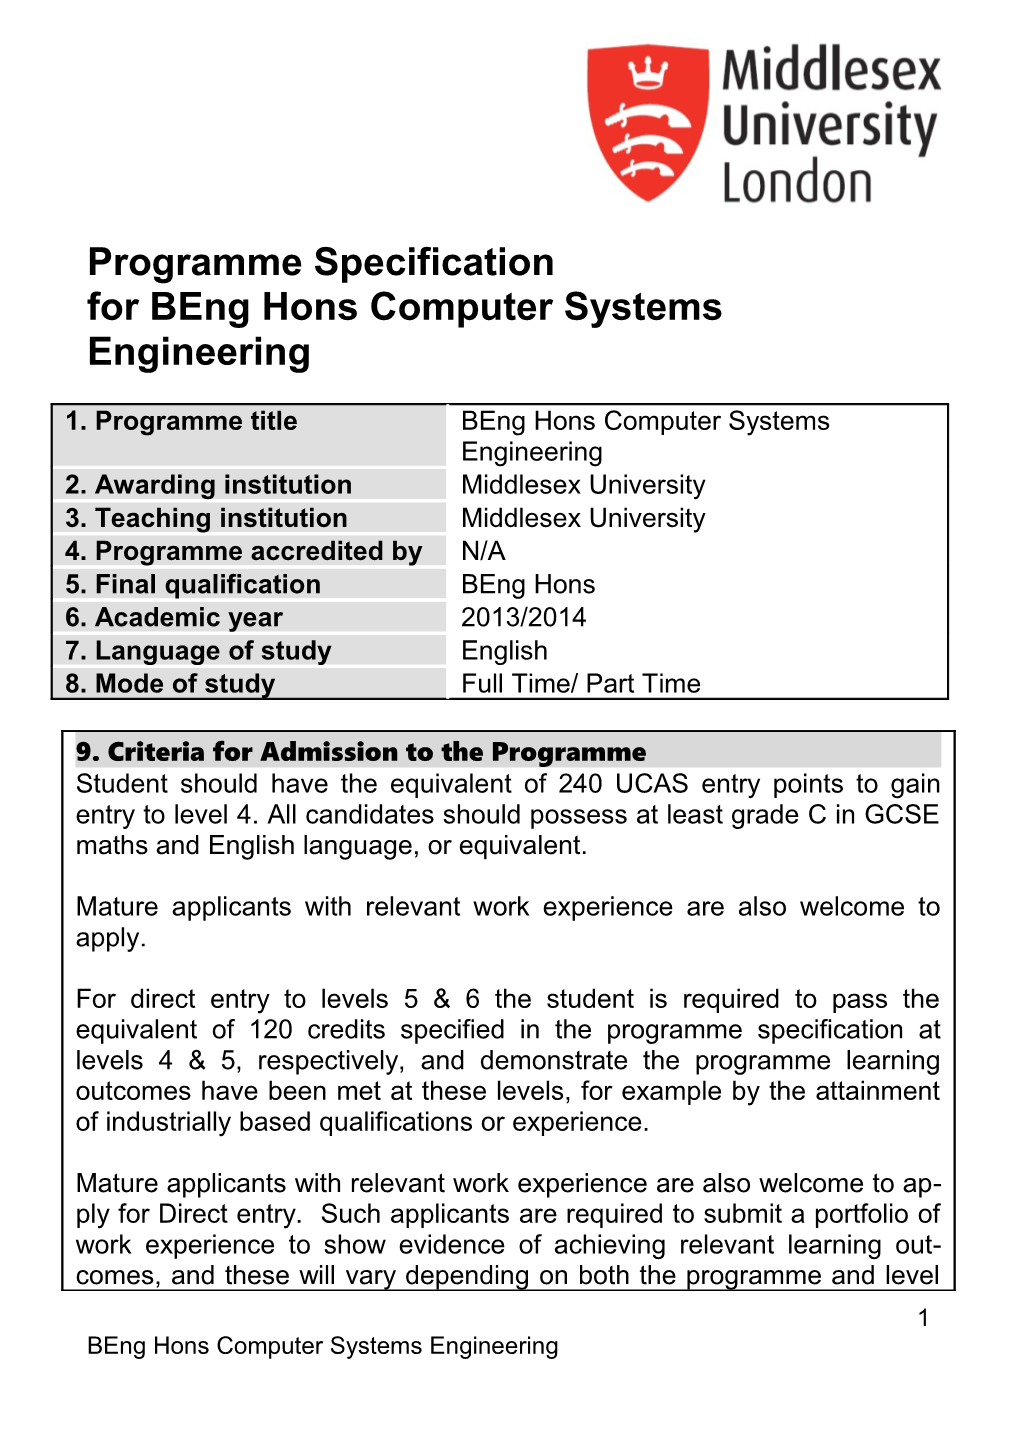 For Beng Hons Computer Systems Engineering